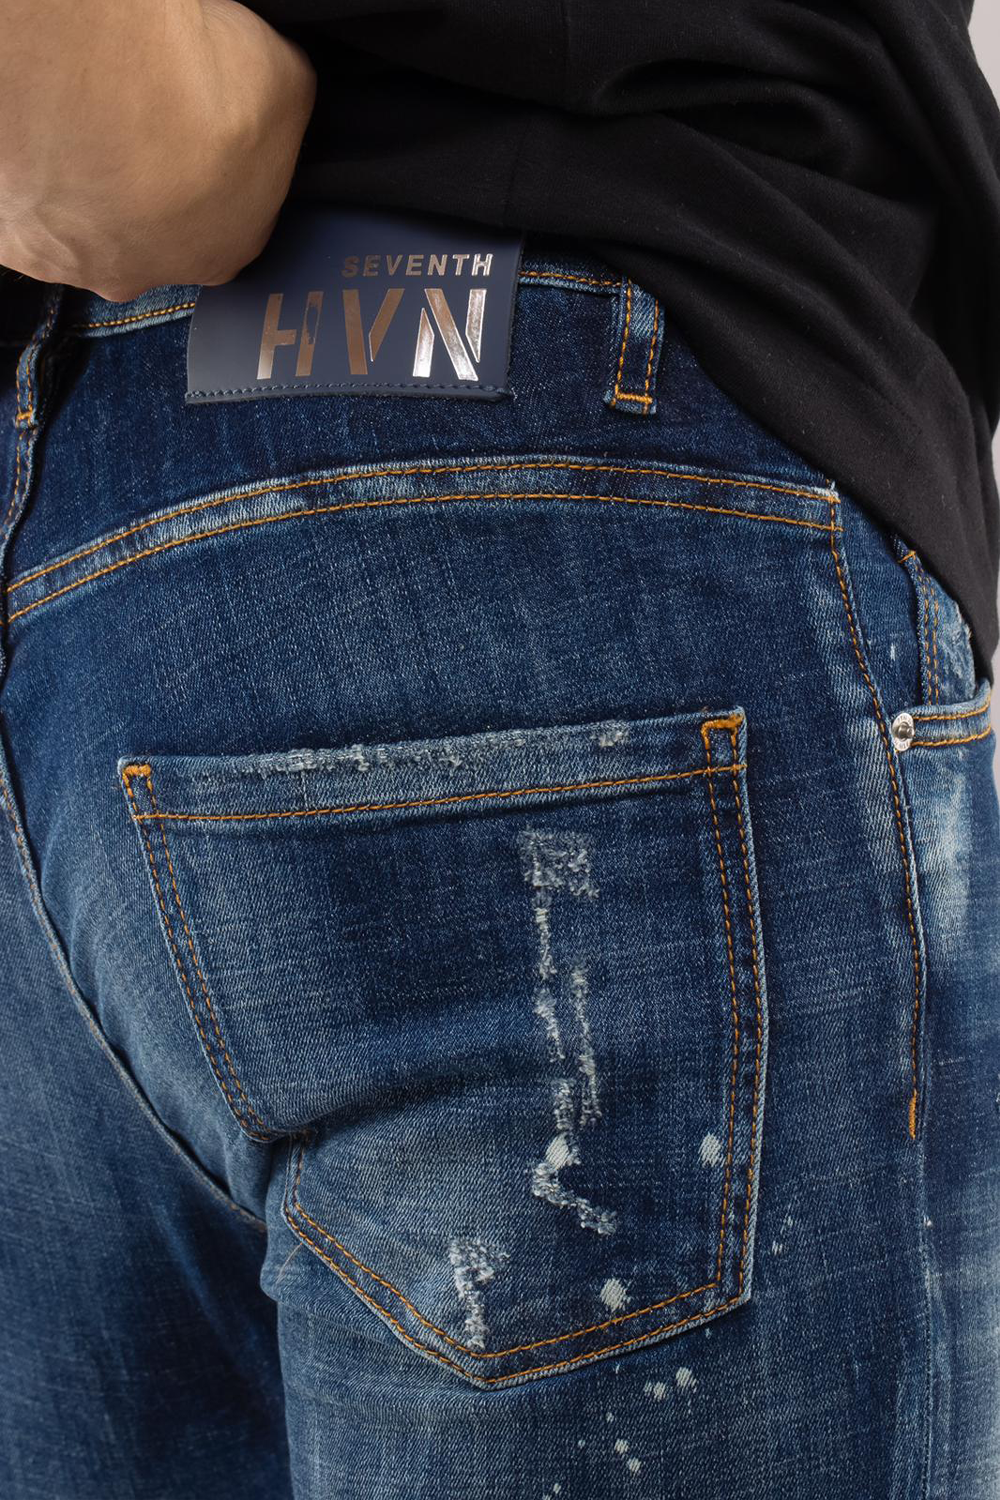 Buy the 7th Hvn Leeroy S2503 Jean in Midnight Blue at Intro. Spend £50 for free UK delivery. Official stockists. We ship worldwide.